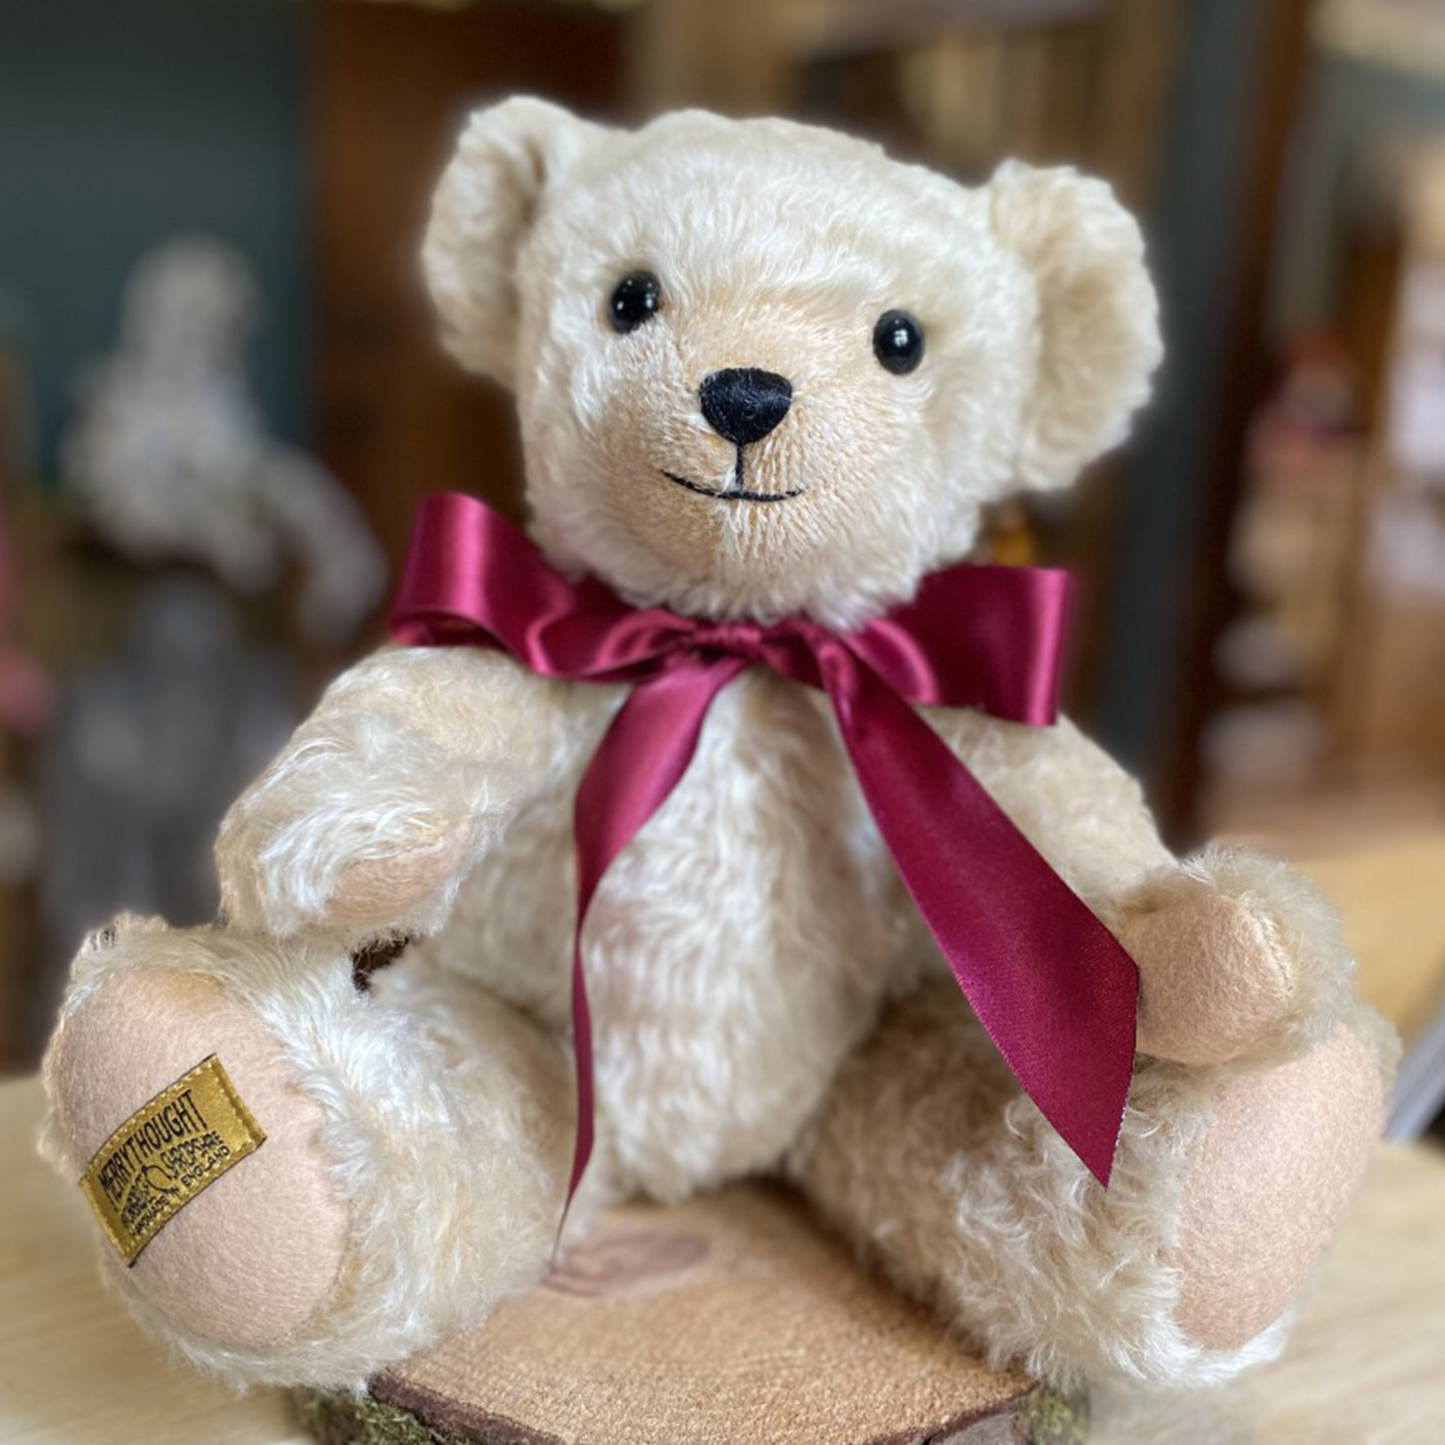 Henley's rich cream mohair has been carefully worked with pinky-beige wool felt, both complemented by an opulent burgundy satin bow. This adorable teddy bear's beaming smile is highlighted by a short-trimmed muzzle, giving him a friendly personality that all will fall in love with.  Each Merrythought soft toy in the Traditional Collection is presented with a drawstring bag, to help keep your new companion clean and dust-free.